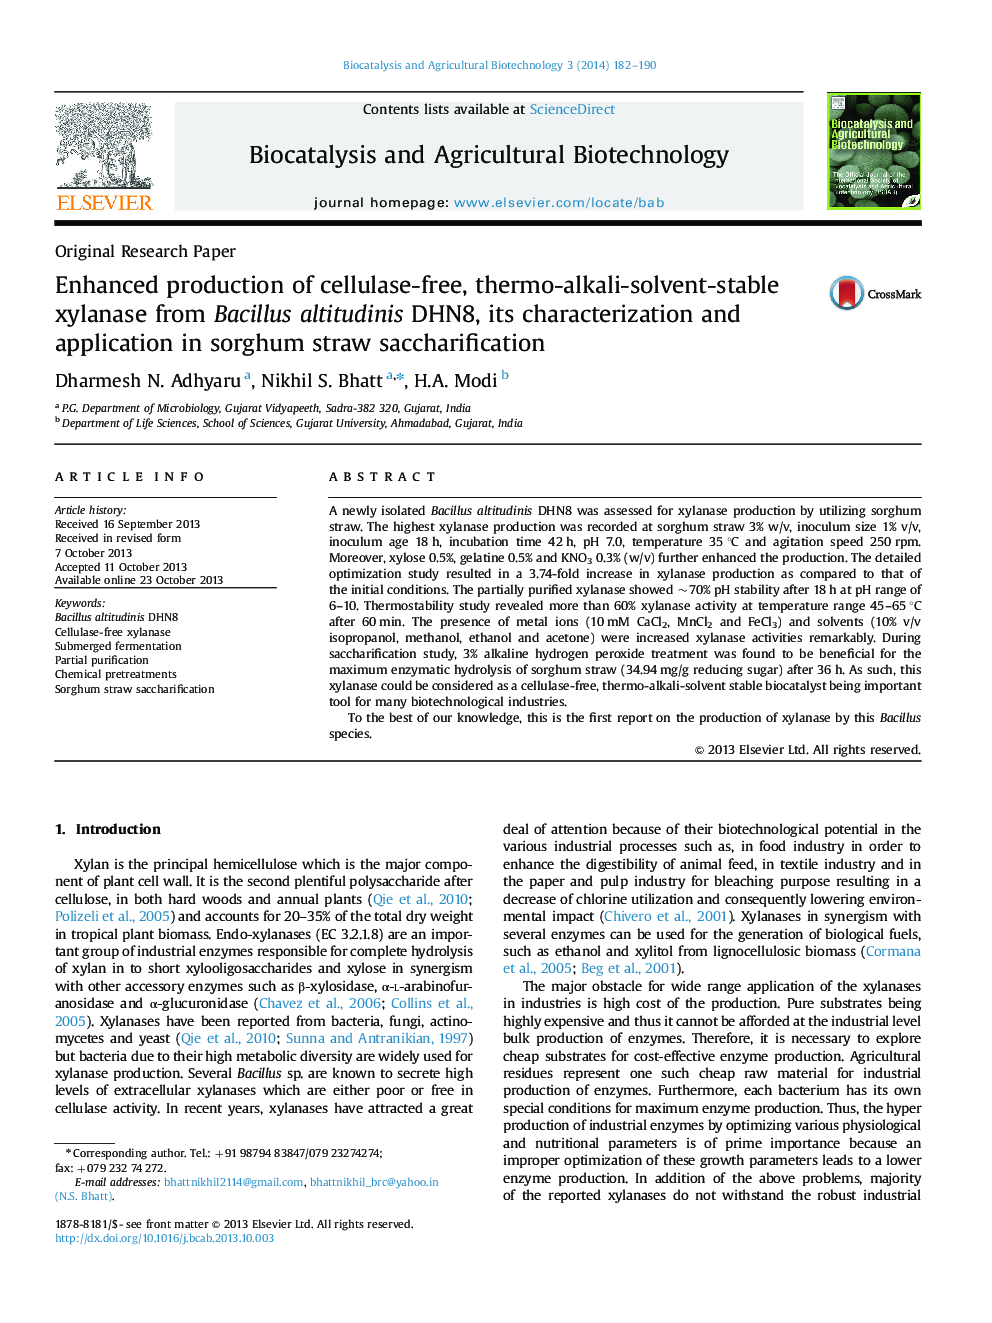 Enhanced production of cellulase-free, thermo-alkali-solvent-stable xylanase from Bacillus altitudinis DHN8, its characterization and application in sorghum straw saccharification